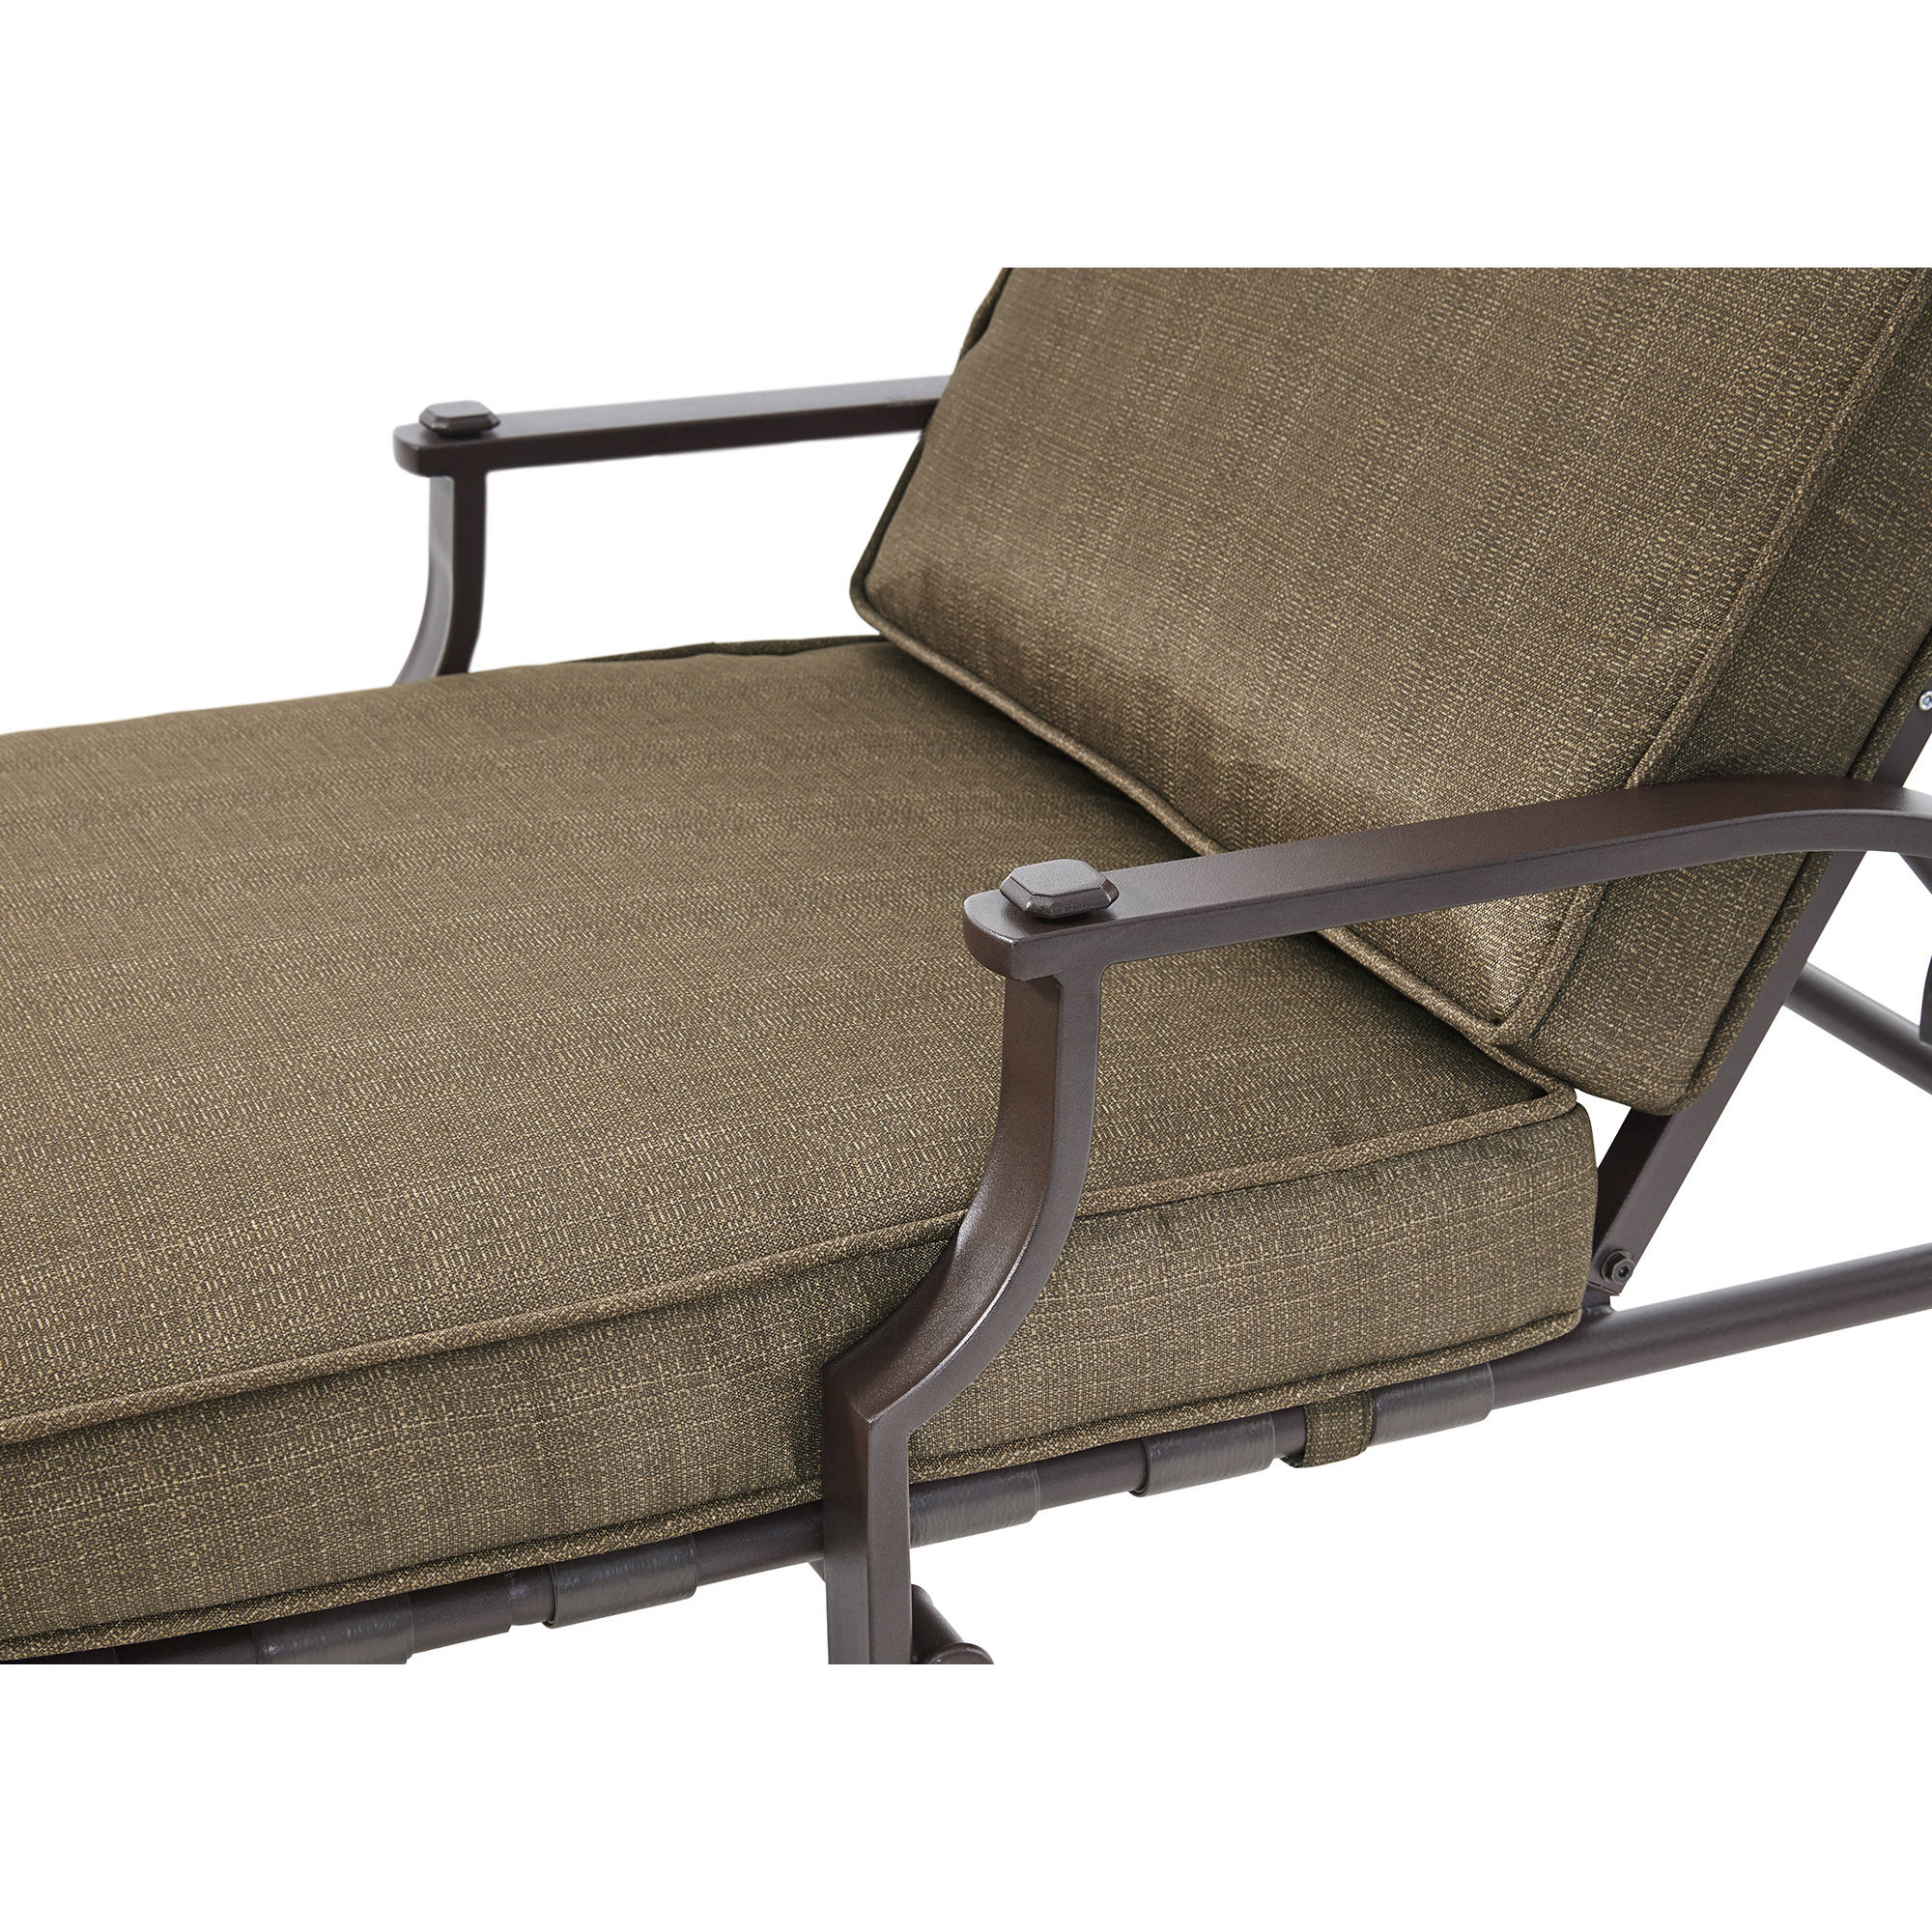 Mainstays Wentworth Chaise Lounge - image 3 of 7